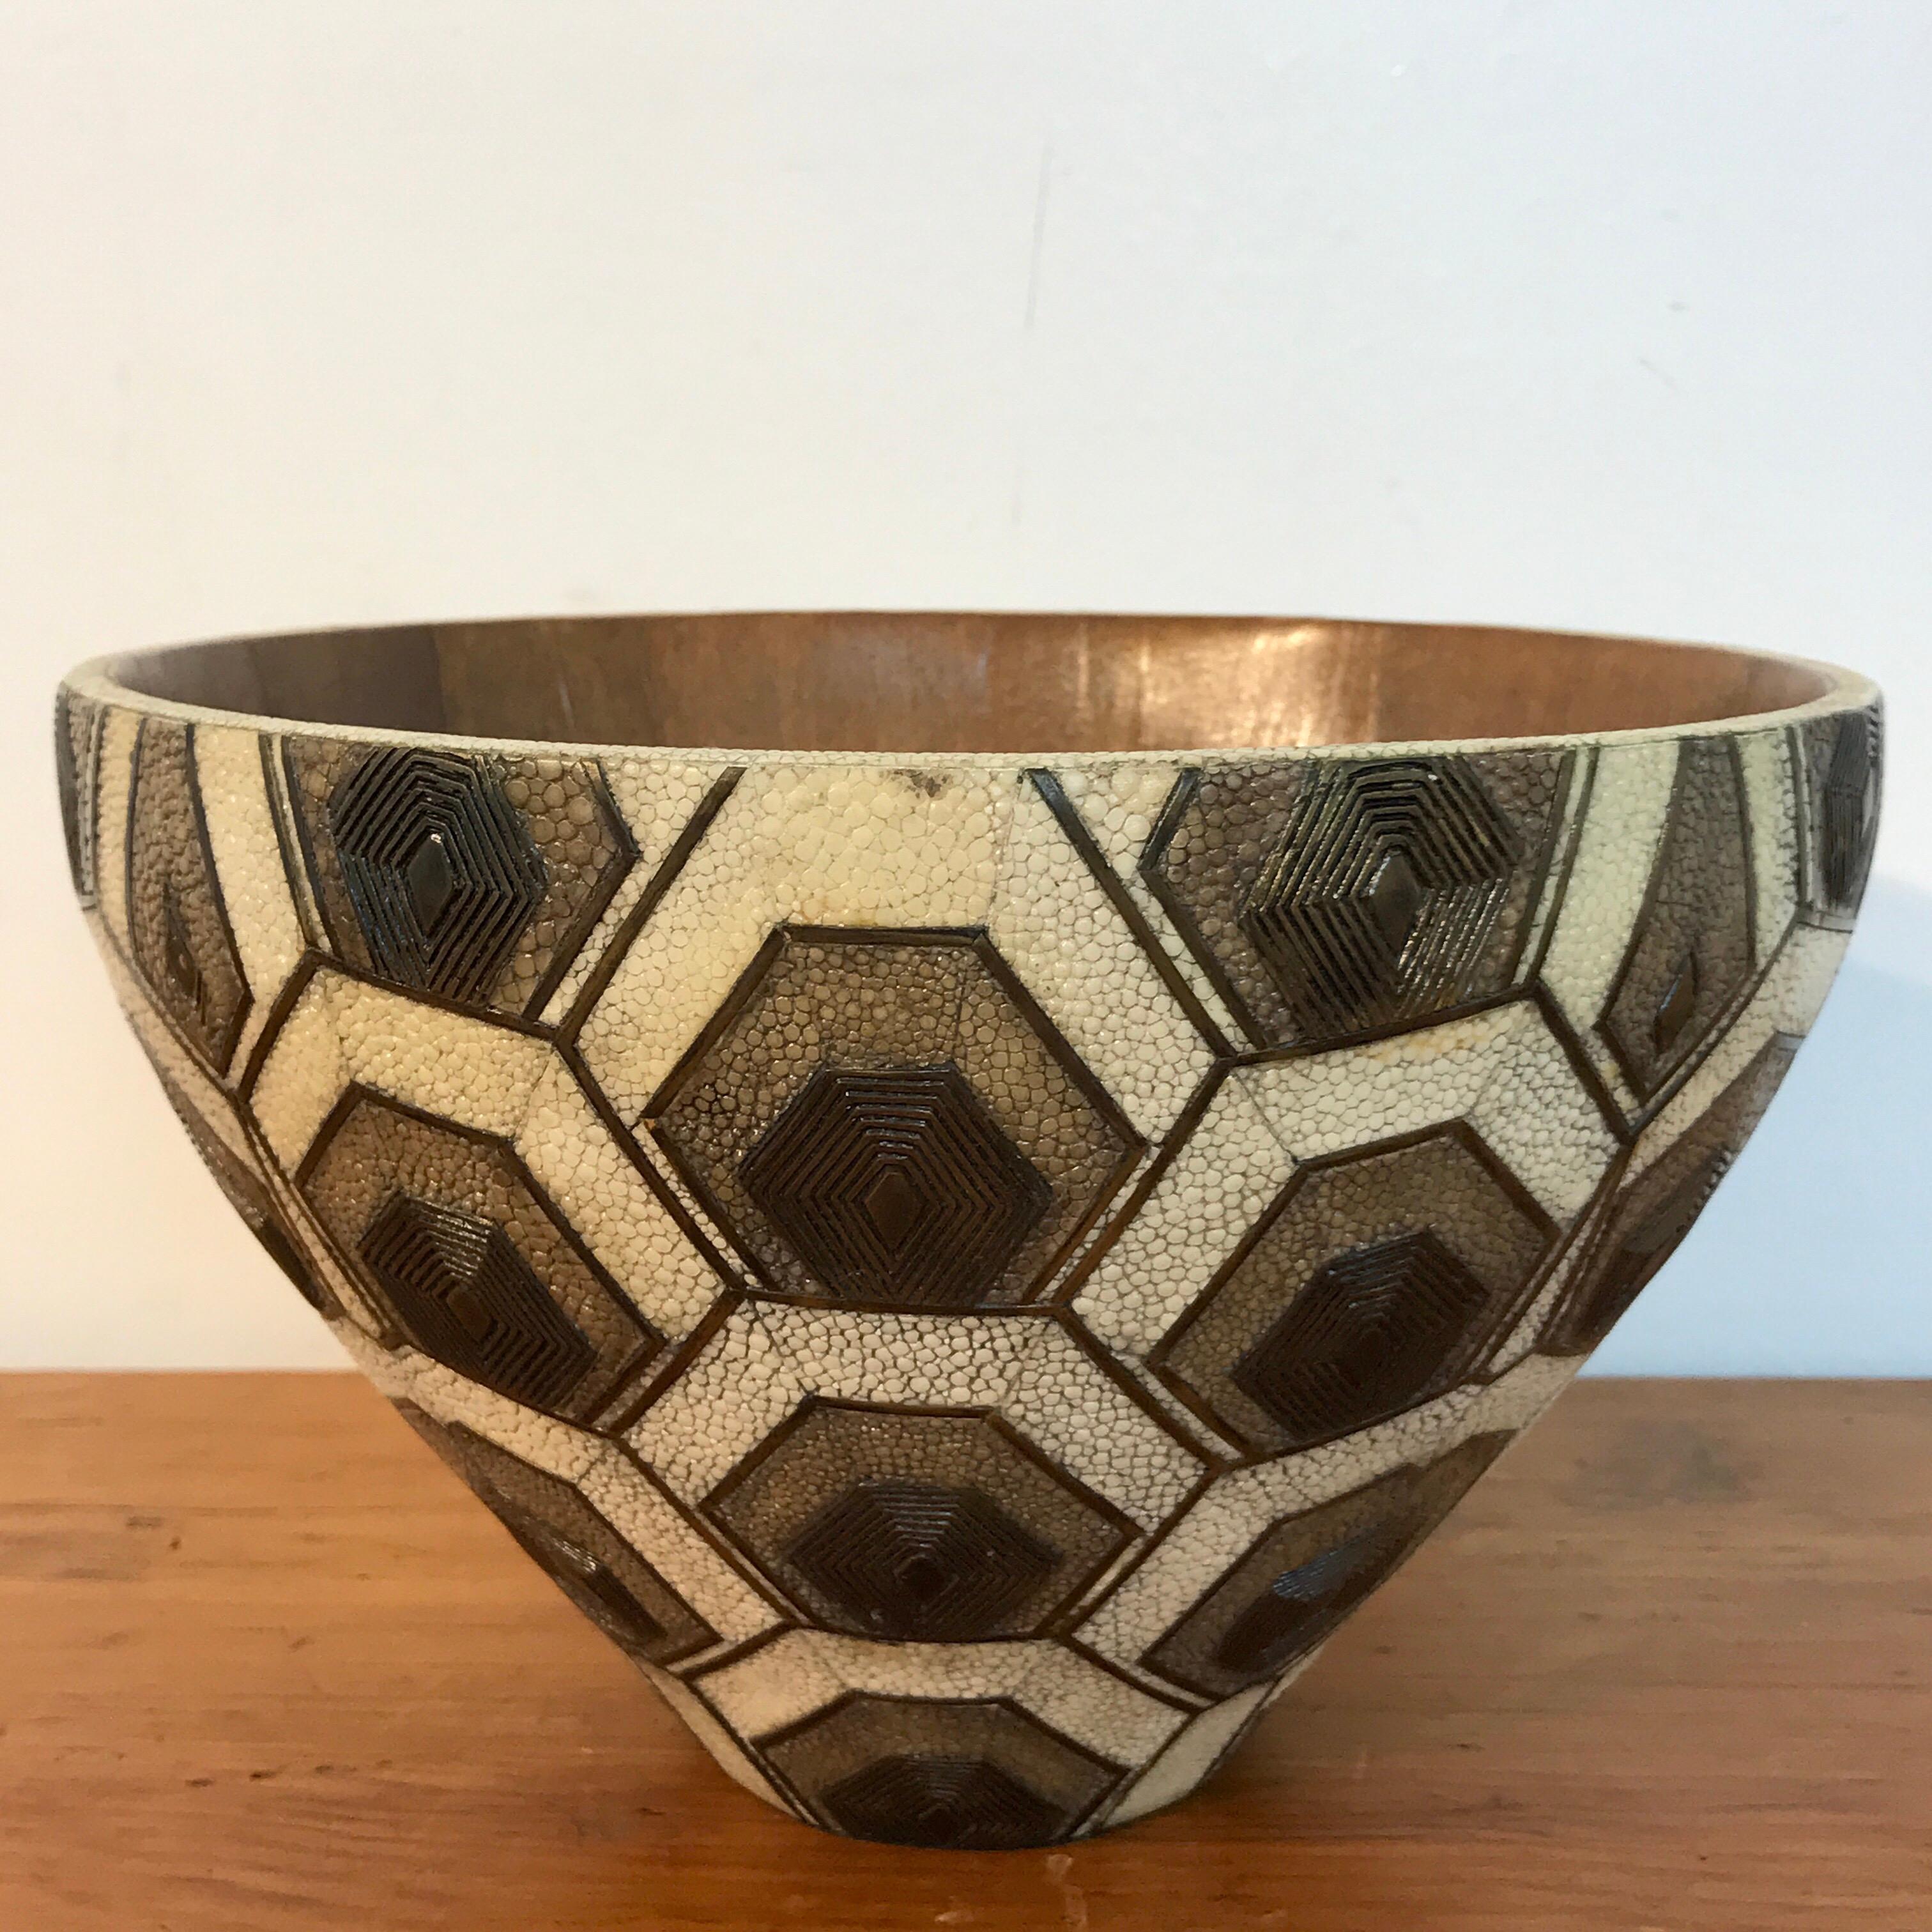 French modern shagreen, bronze and wood bowl, by R&Y Augousti, with continuous inlays of white and gray shagreen, reeded bronze medallions, and bookmatched mahogany 8.5